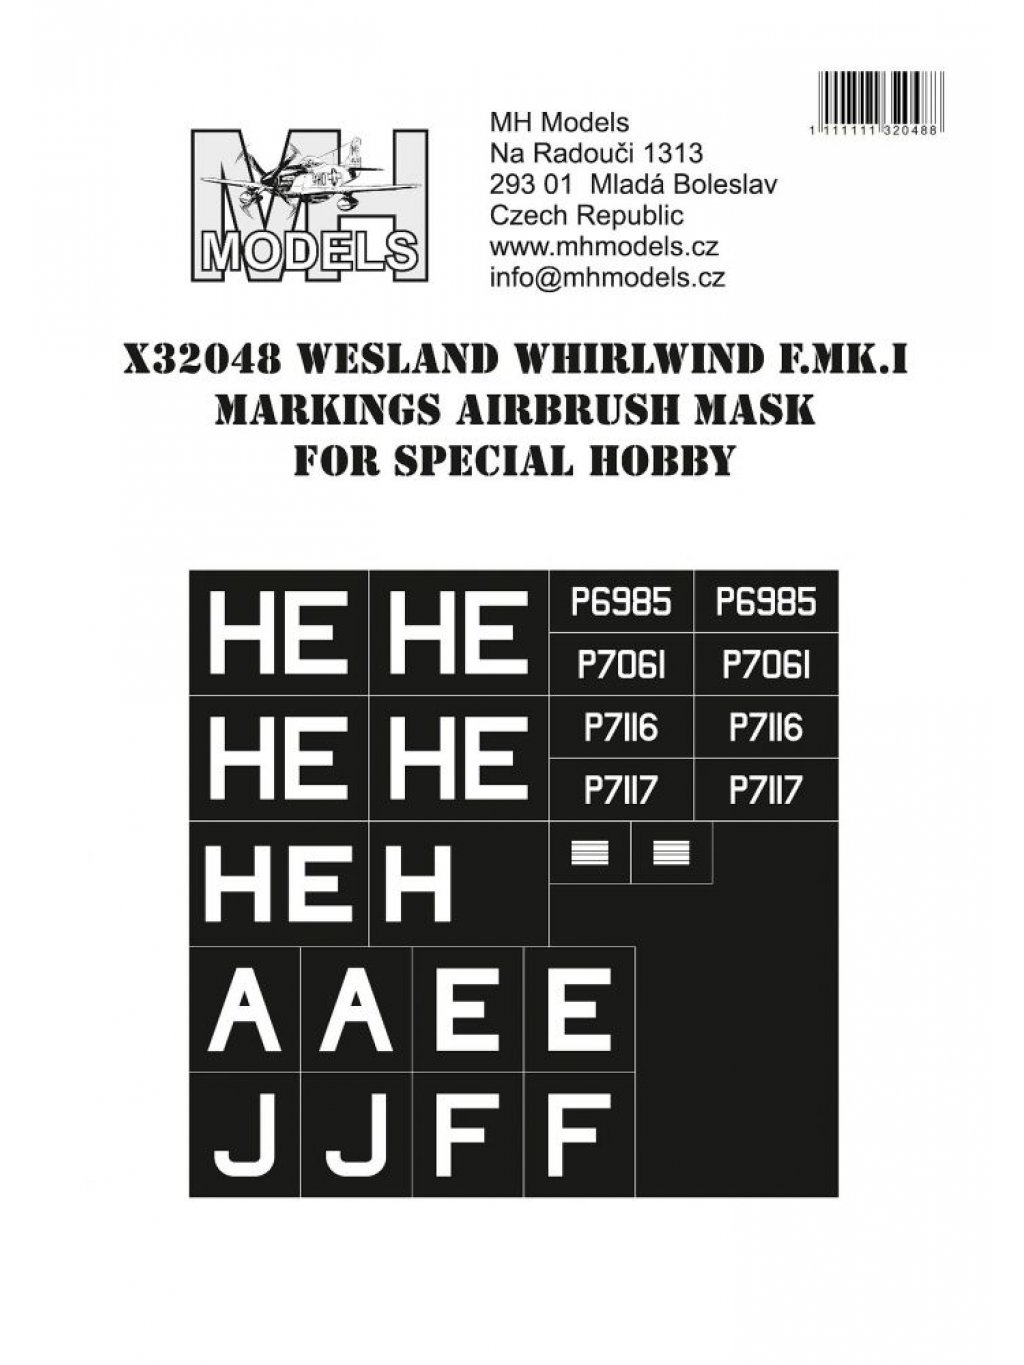 Westland Whirlwind F.Mk.I Markings airbrush mask for Special Hobby